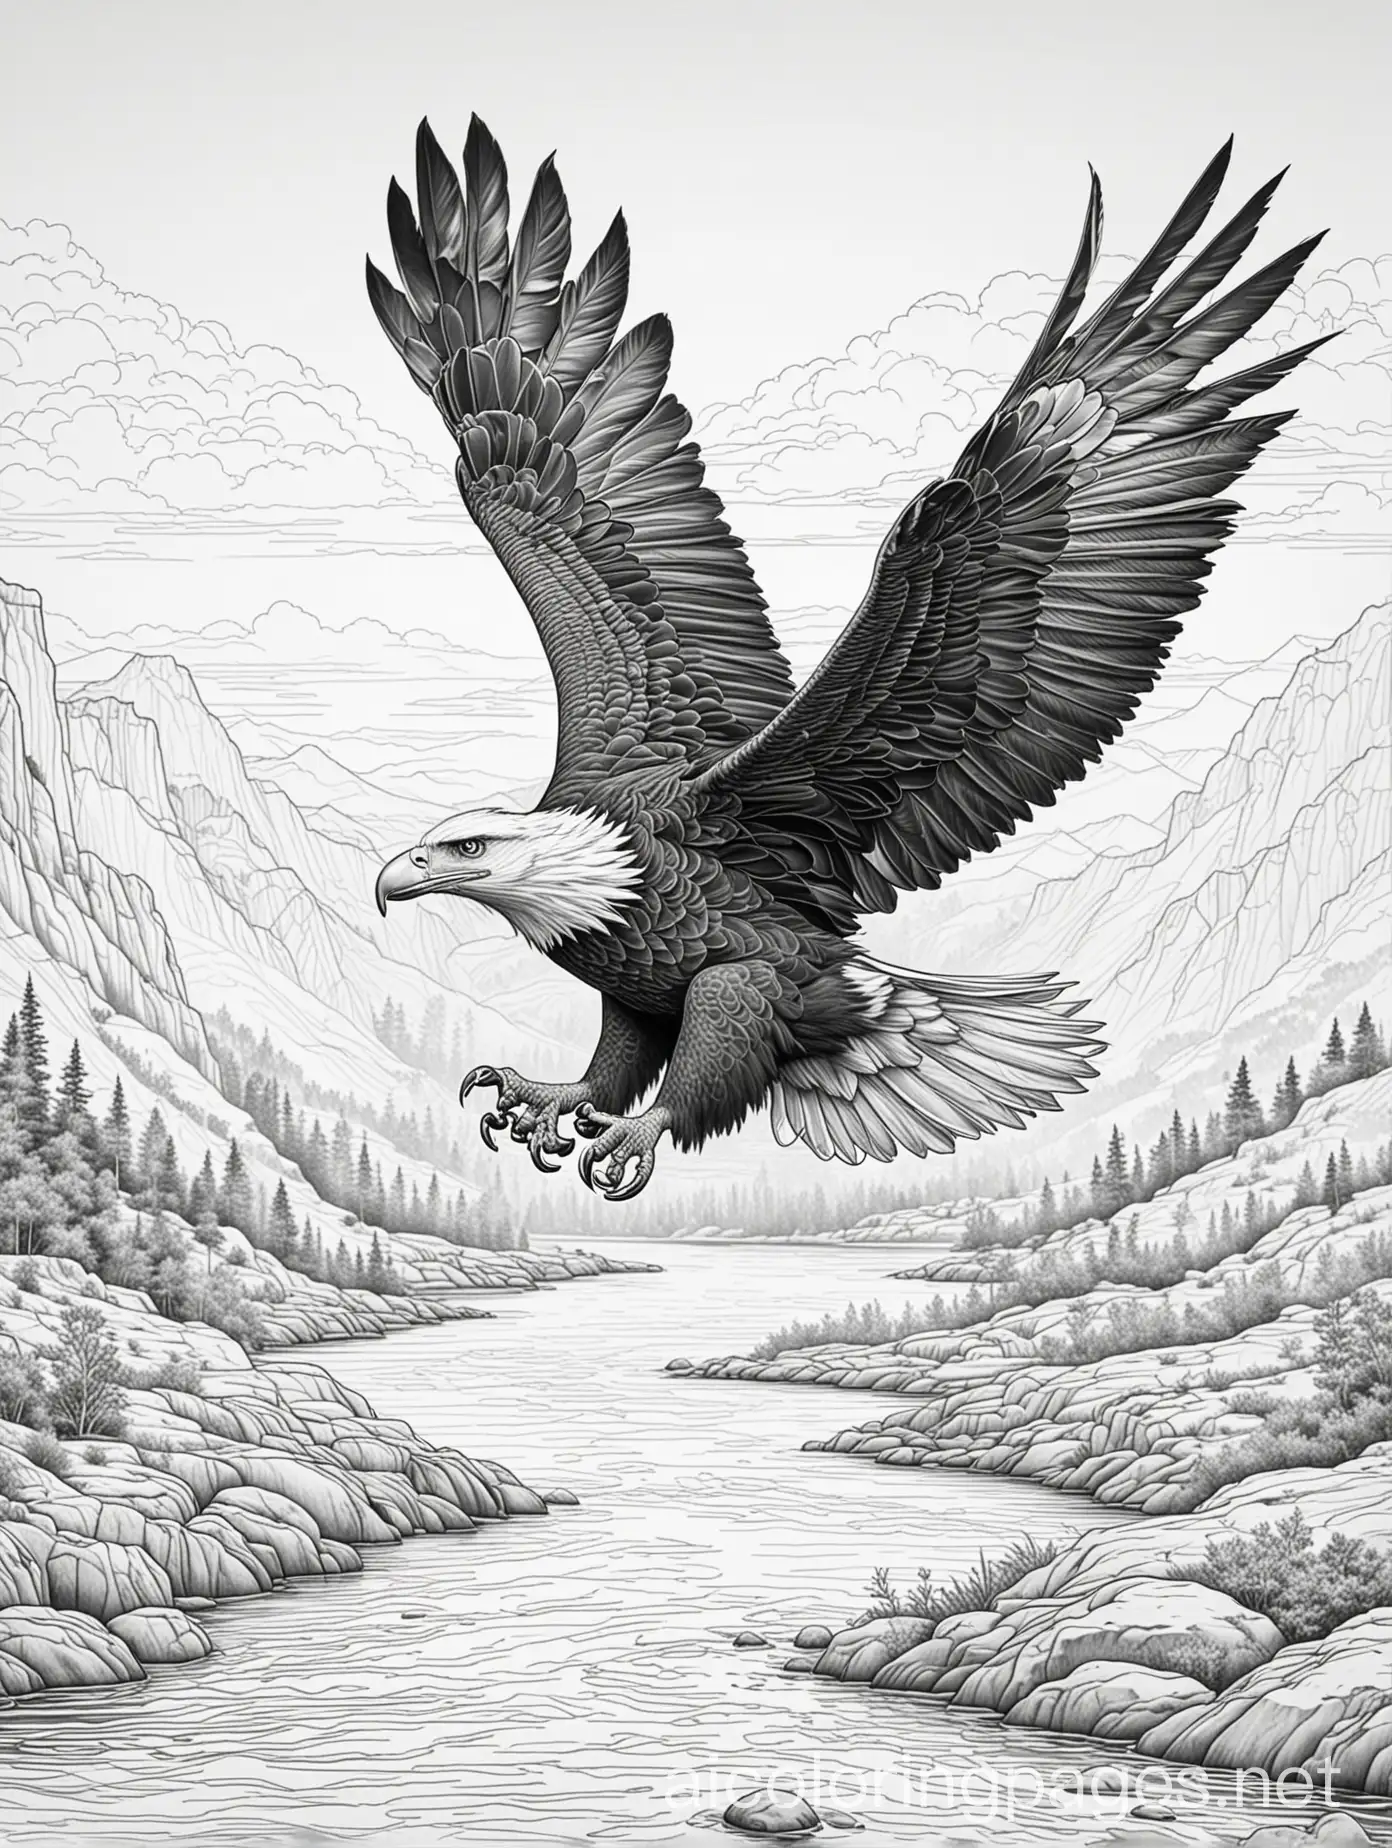 Eagle flying over river, Coloring Page, black and white, line art, white background, Simplicity, Ample White Space. The background of the coloring page is plain white to make it easy for young children to color within the lines. The outlines of all the subjects are easy to distinguish, making it simple for kids to color without too much difficulty